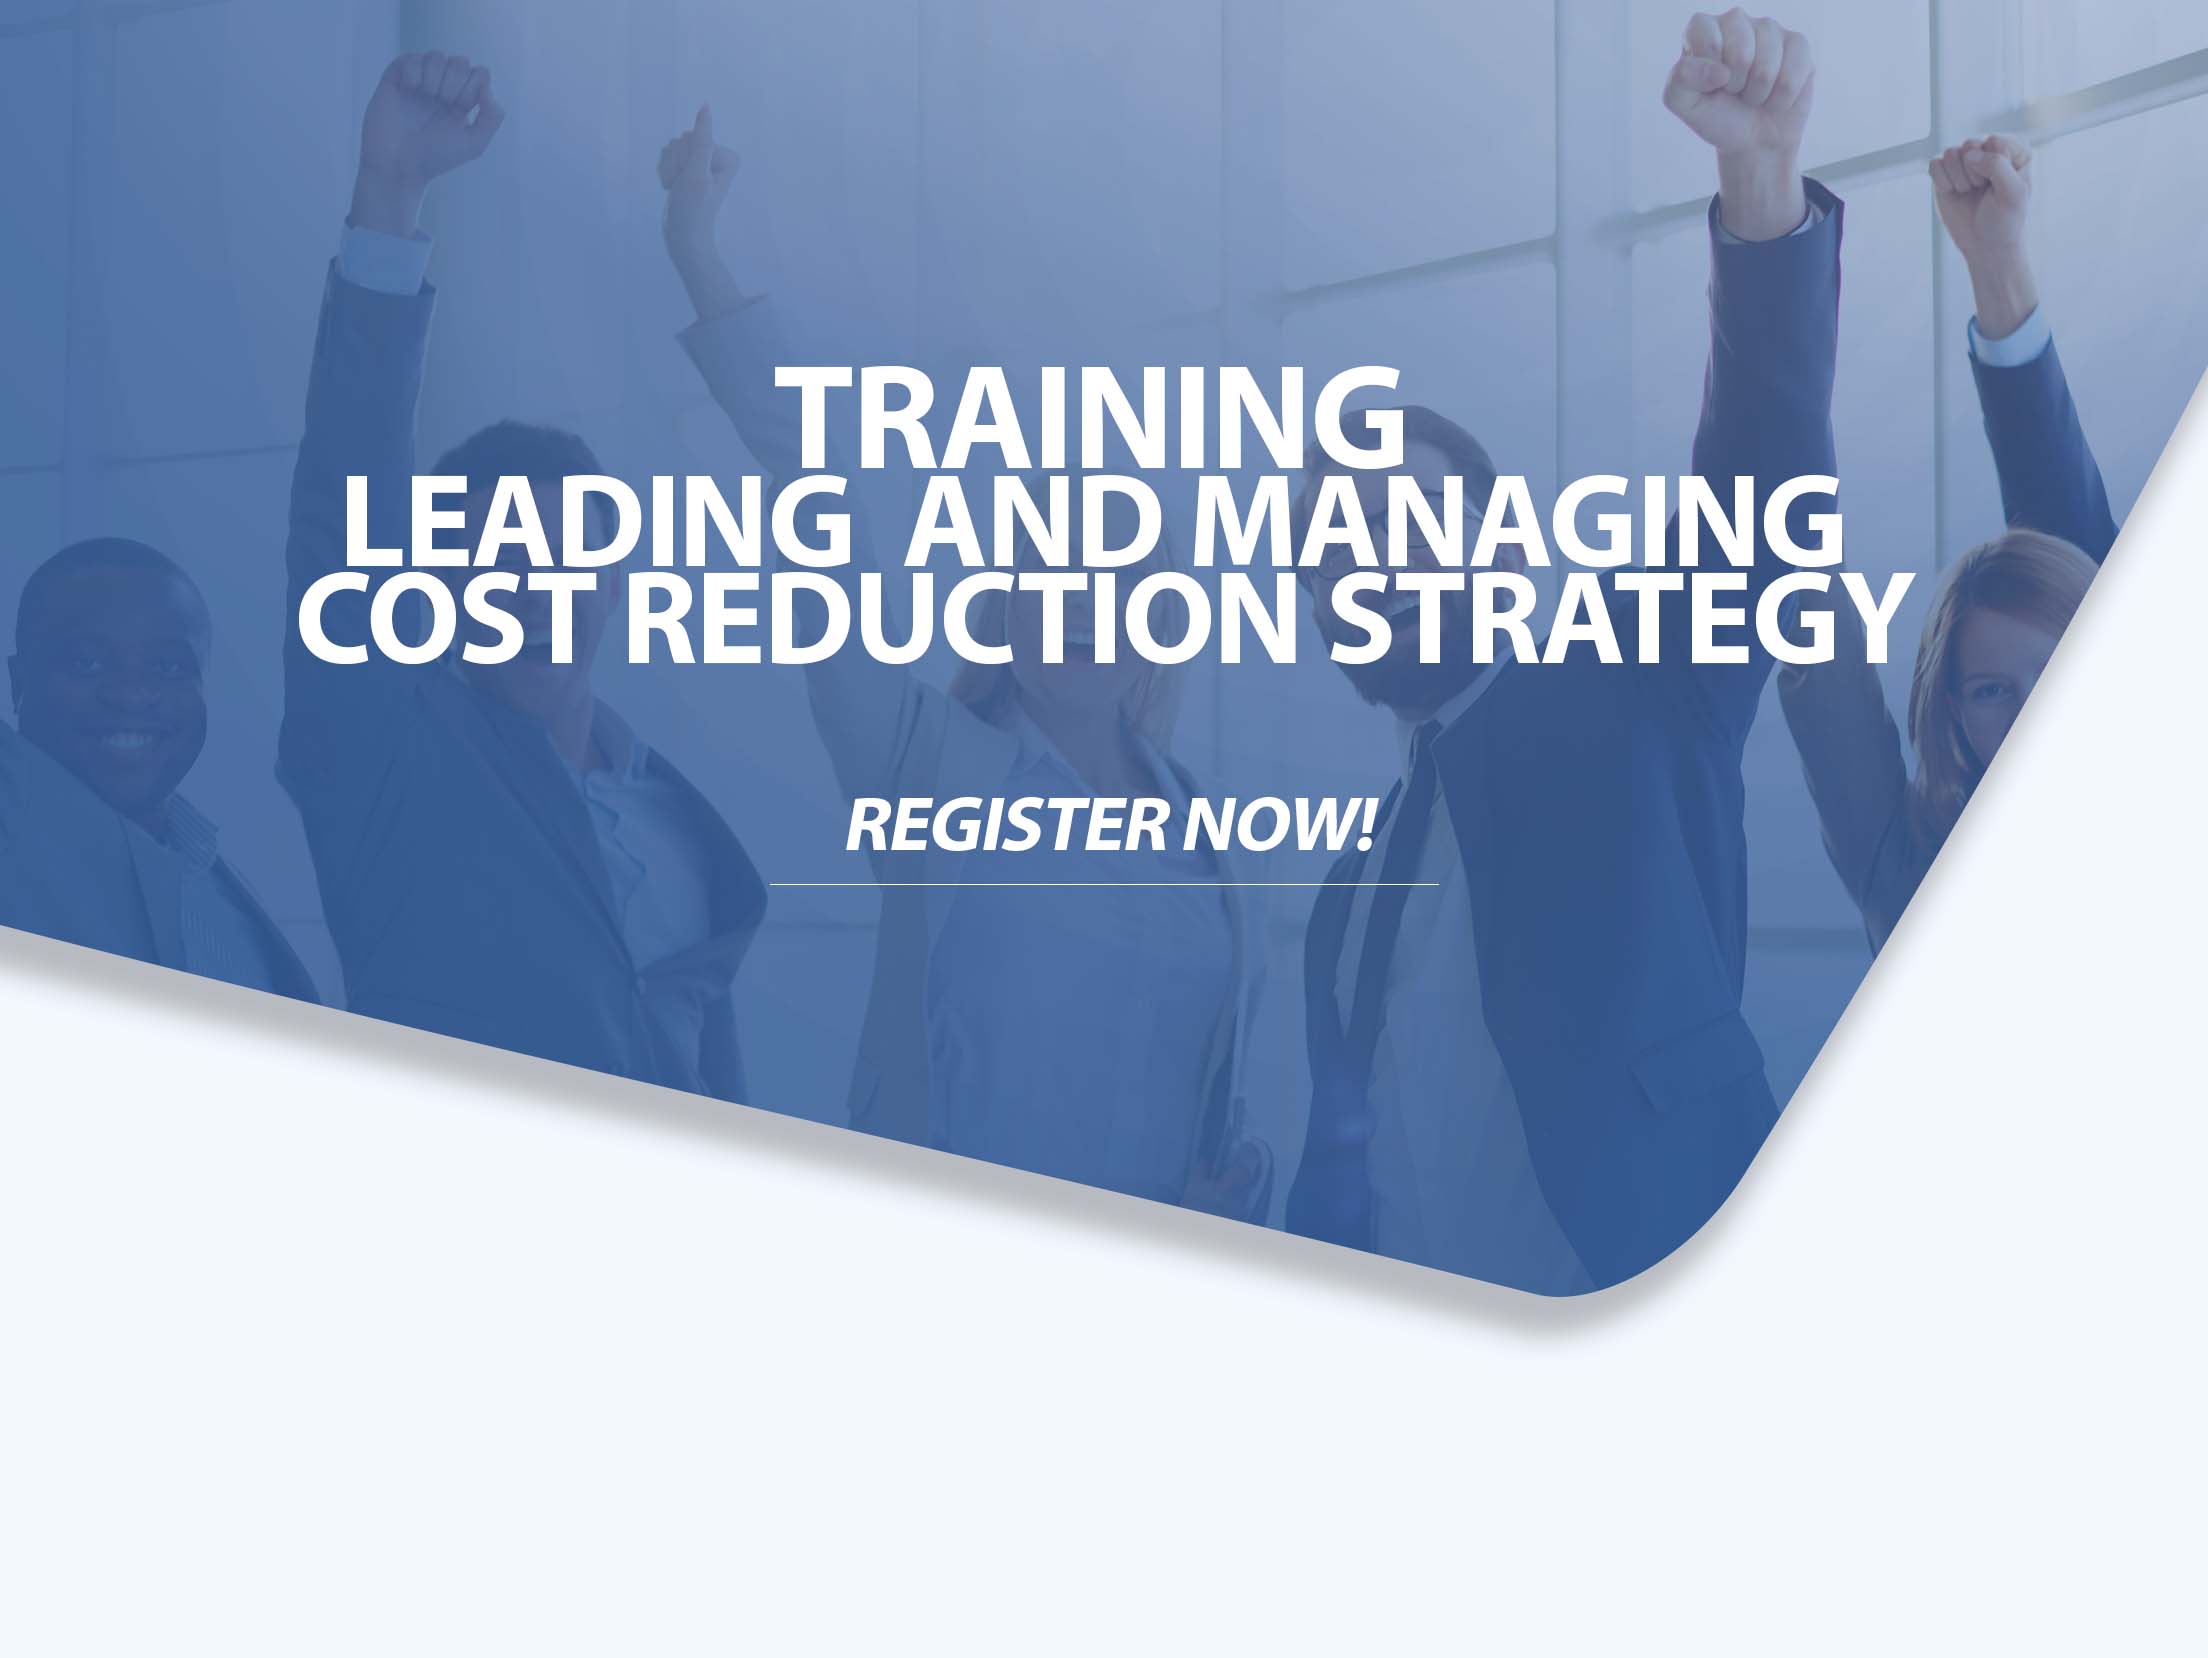 Training Leading and Managing Cost Reduction Strategy